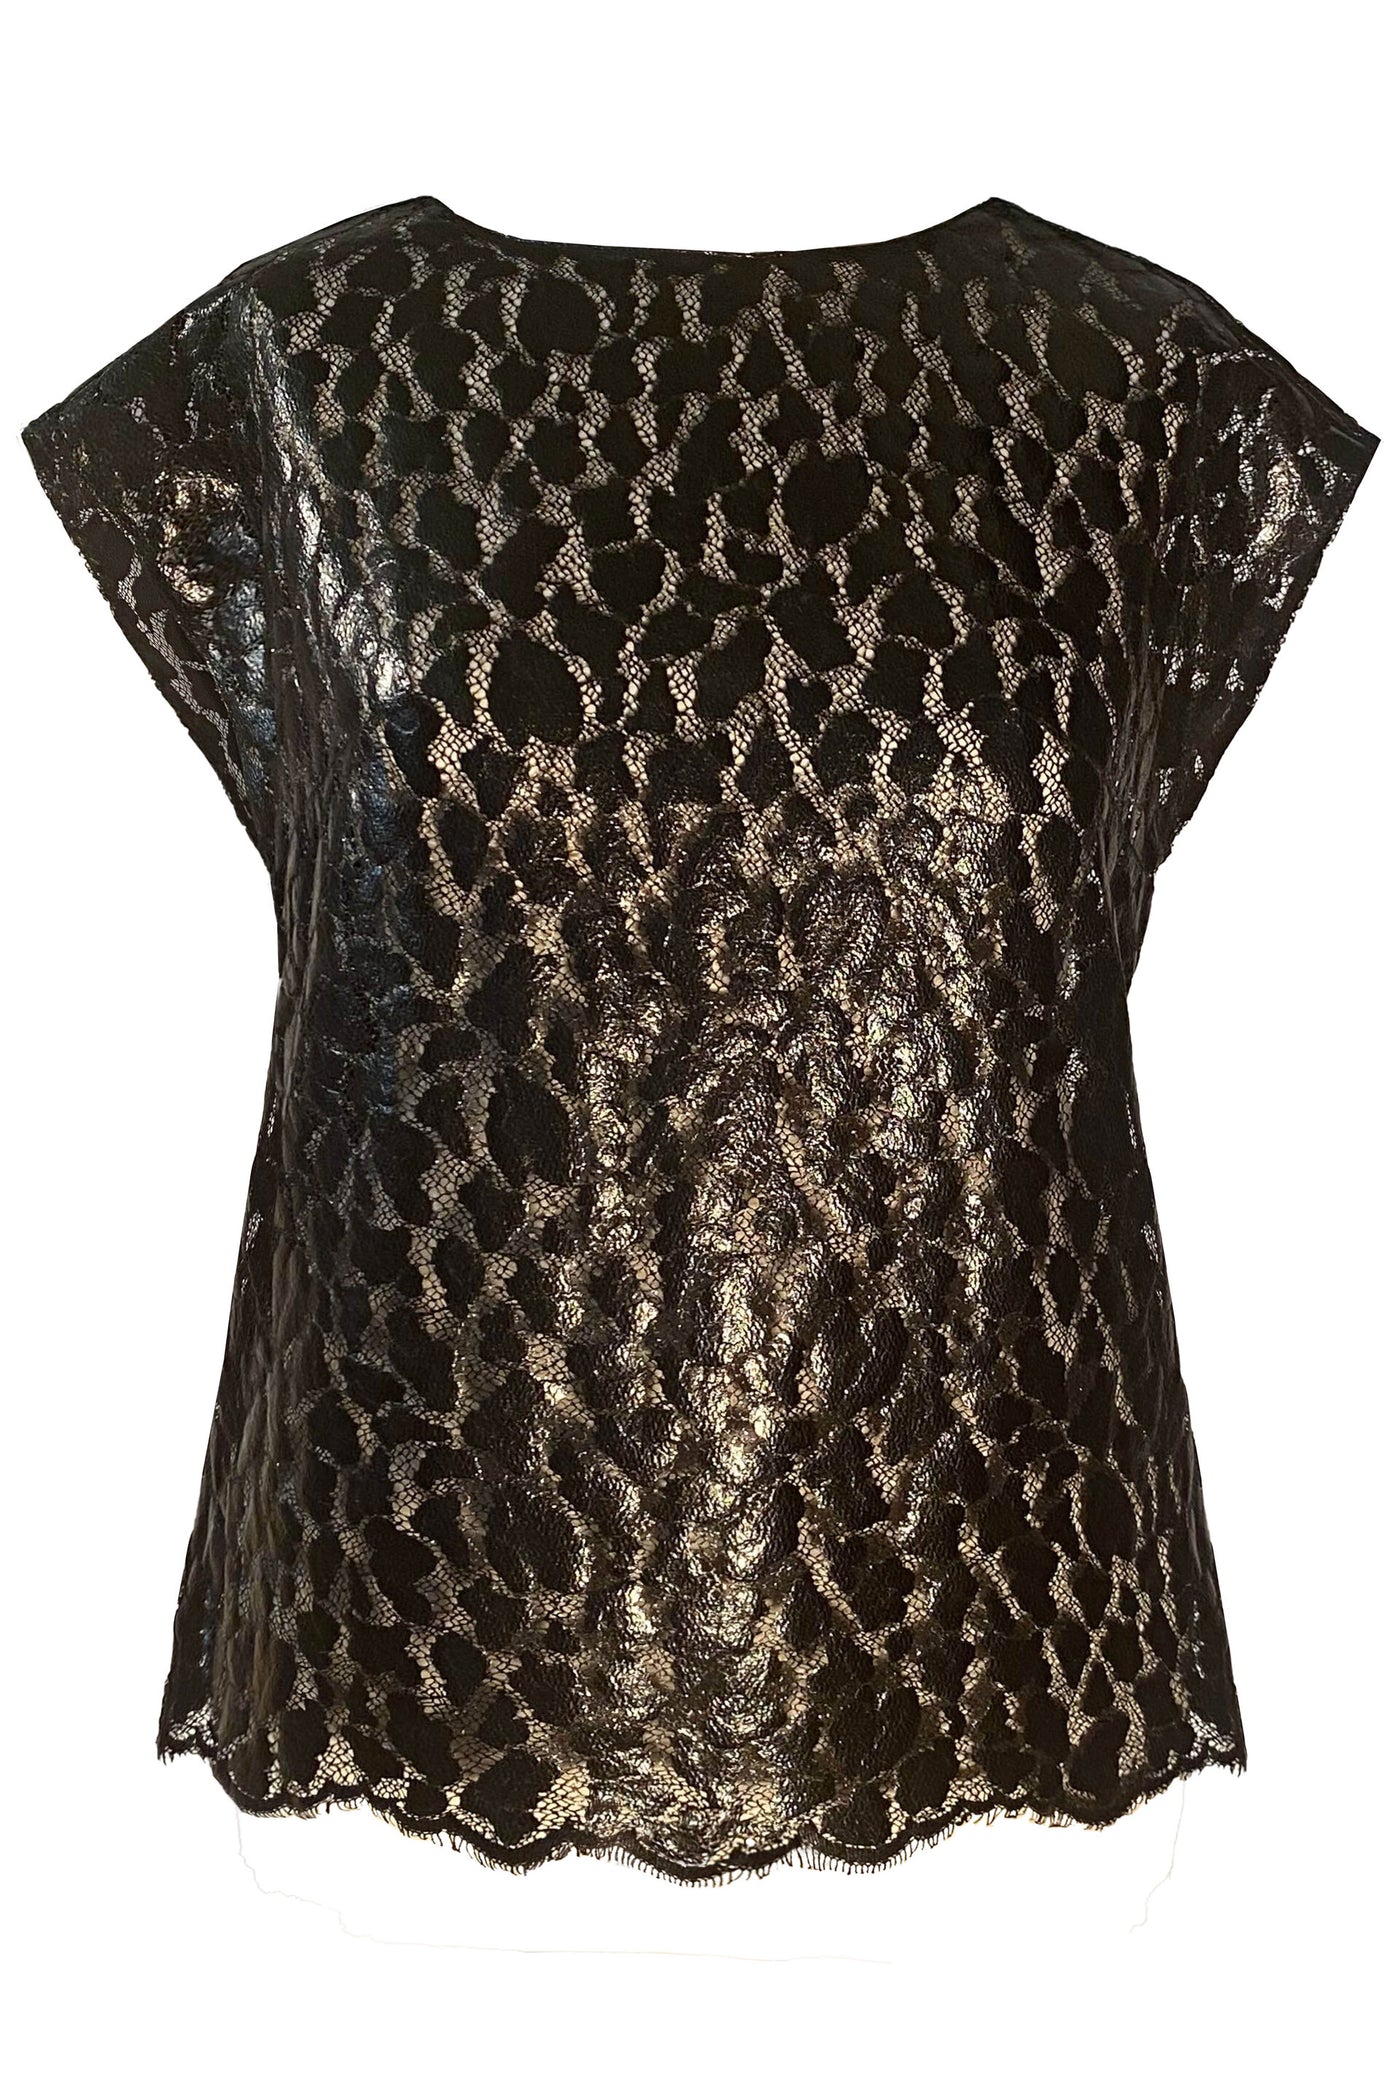 BLACK CAMISOLE IN LEOPARD SHINY COATED LACE 